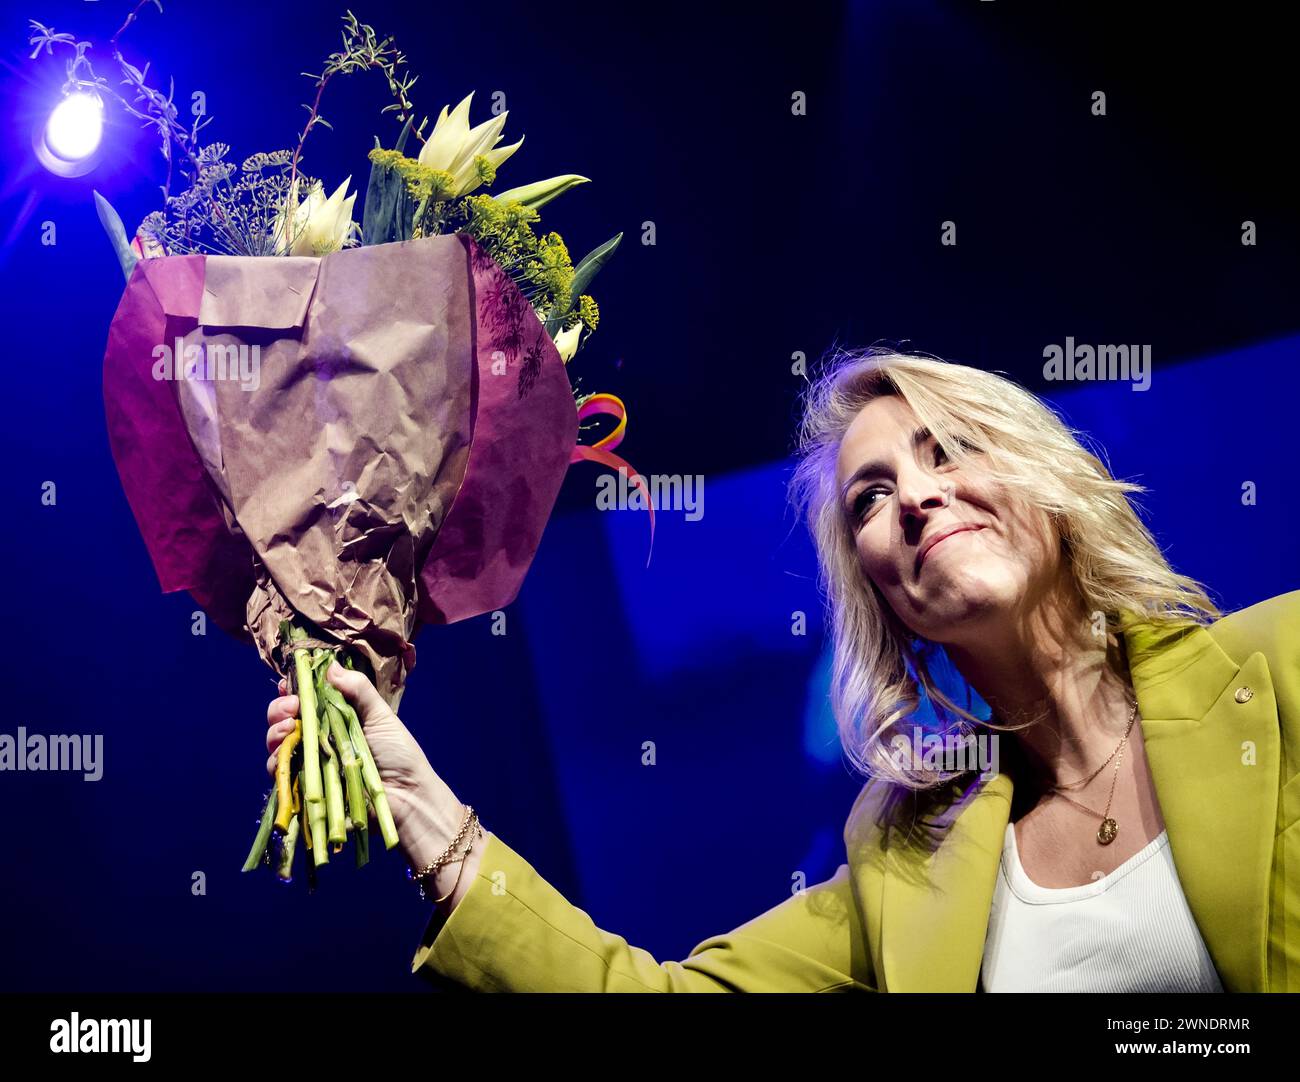 BUSSUM - Former party leader Lilian Marijnissen during her farewell at the SP party conference. Marijnissen is leaving because she believes her party needs 'a new face' after losing elections again in November. ANP SEM VAN DER WAL netherlands out - belgium out Credit: ANP/Alamy Live News Credit: ANP/Alamy Live News Stock Photo